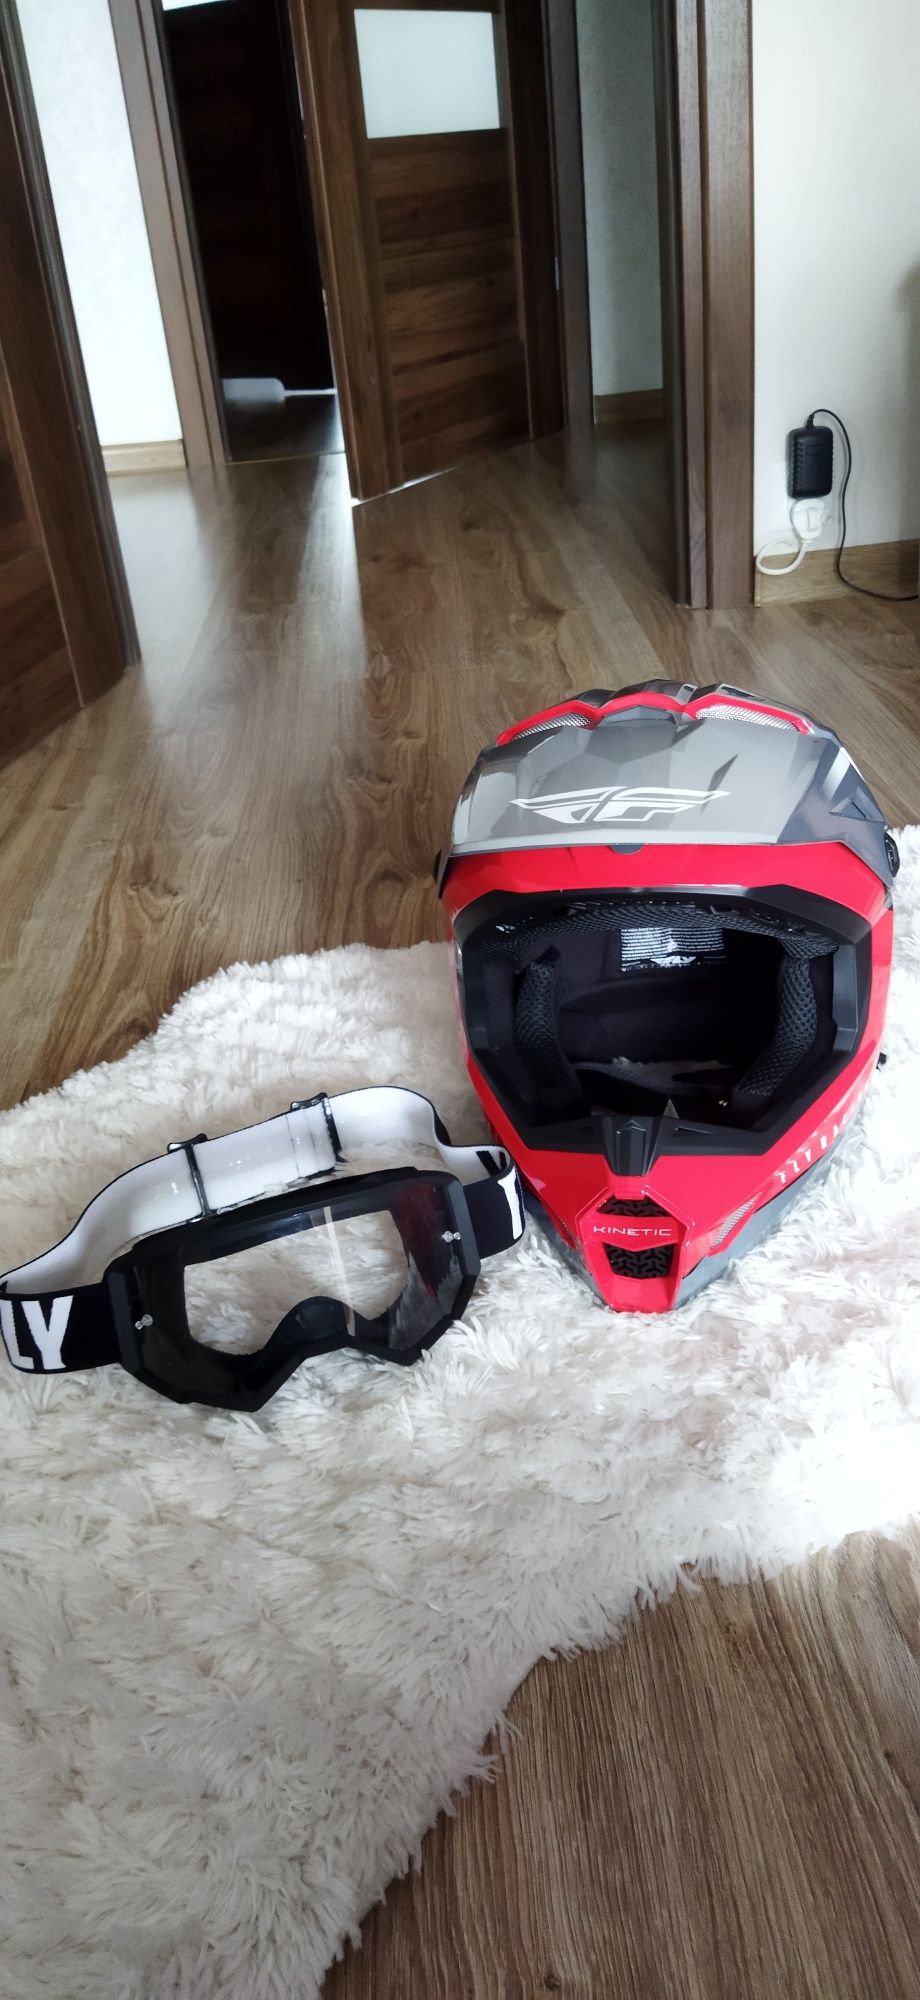 Kask off-road FLY RACING